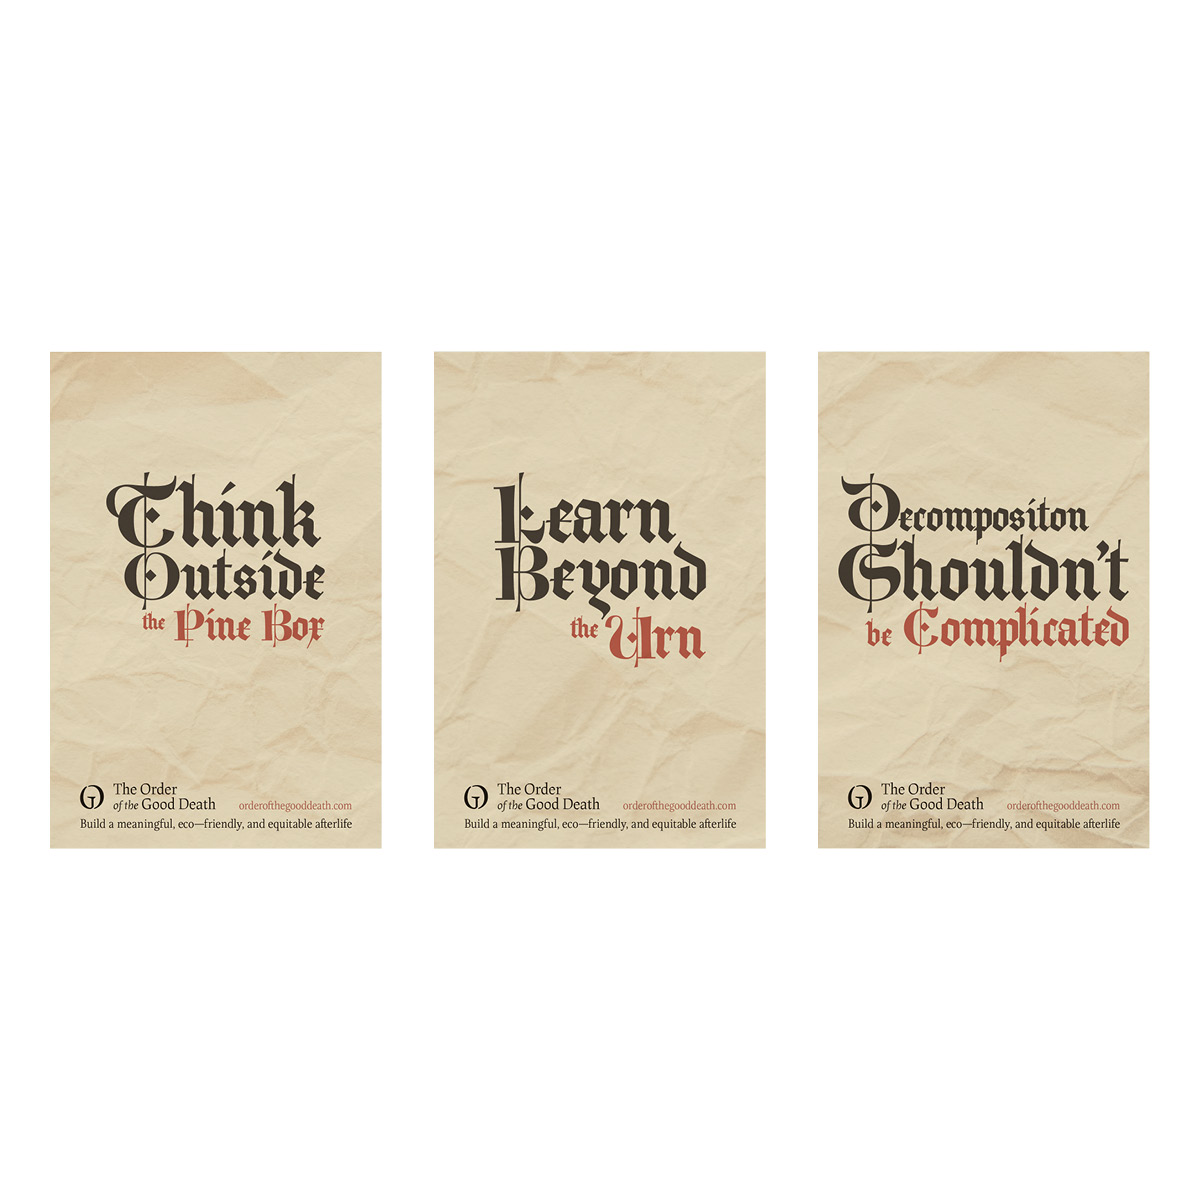 Typographic campaign for The Order of the Good Death for a non-profit, using gothic typography on aged parchment paper with tagline.